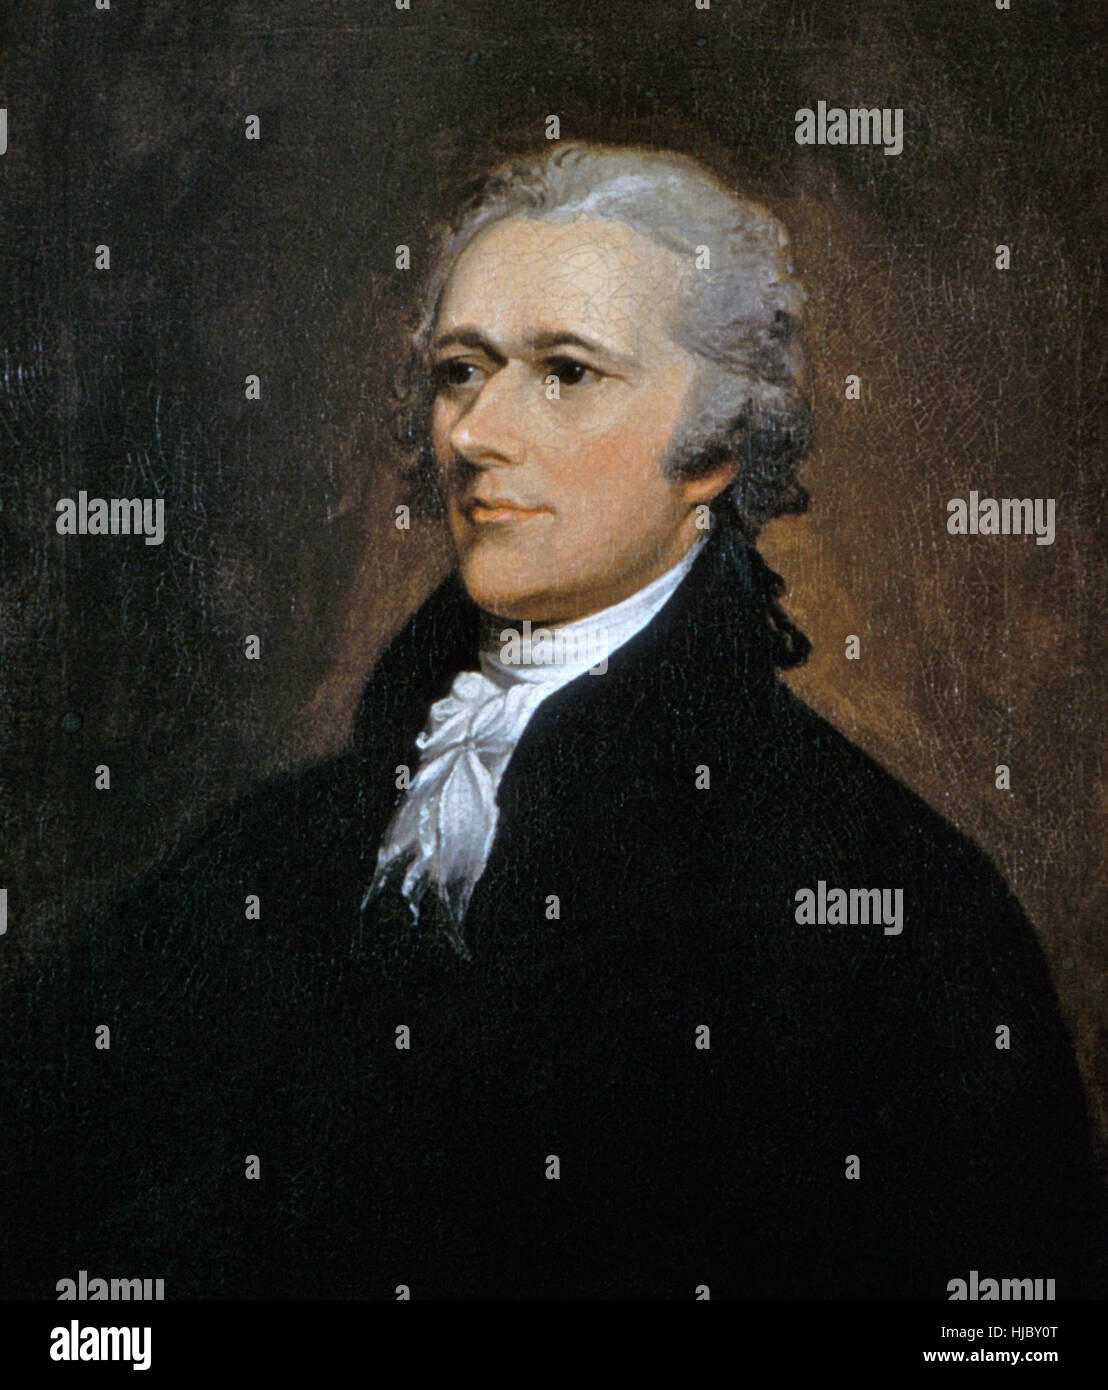 ALEXANDER HAMILTON (1755 ? - 1804) one of the Founding Fathers of the United States. painted by  John Trumbull in 1806 Stock Photo